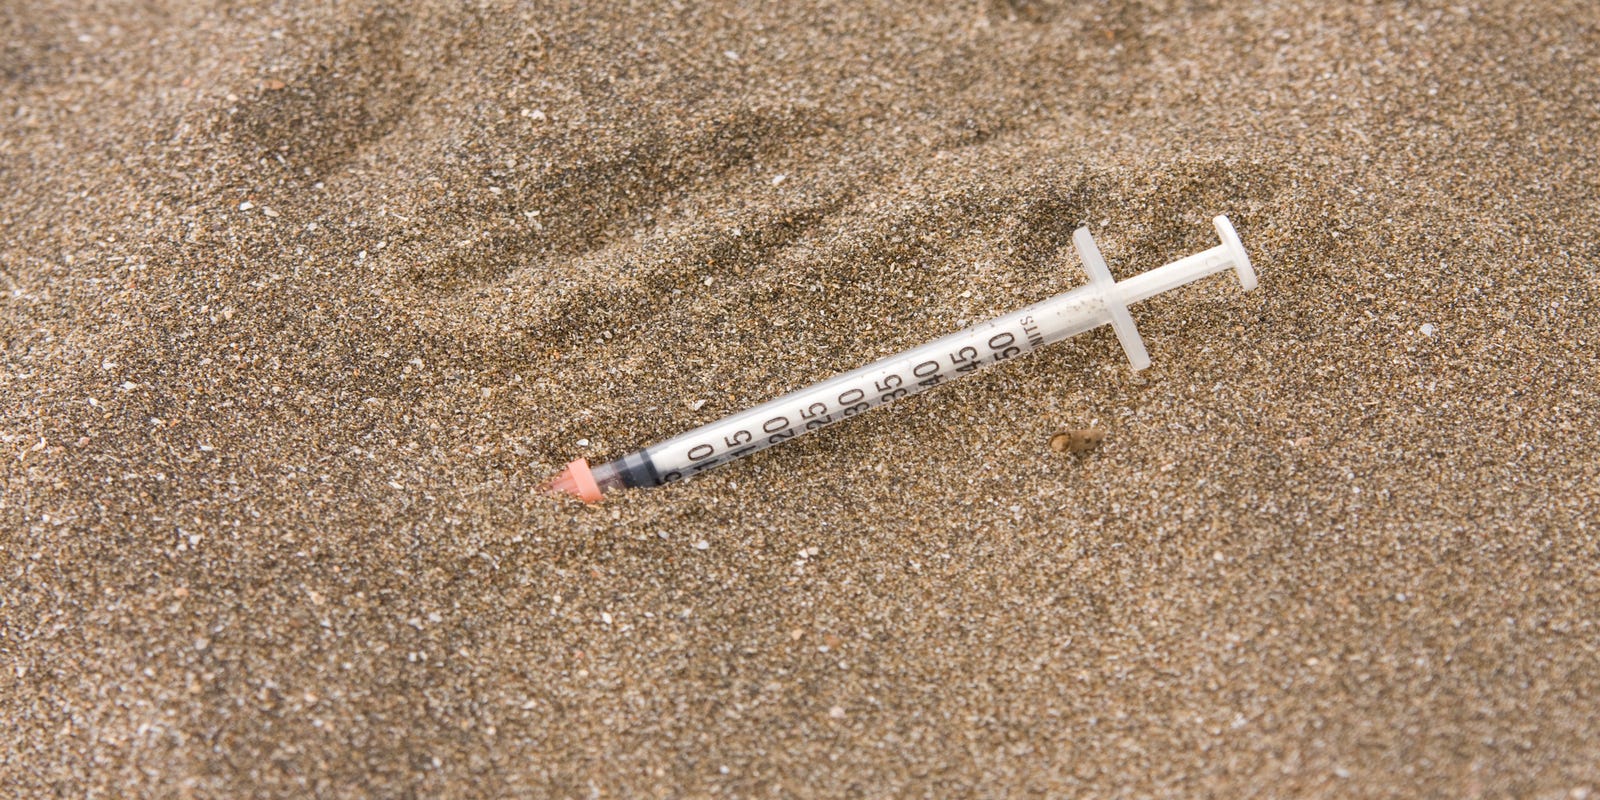 What to do if you find a used needle in public